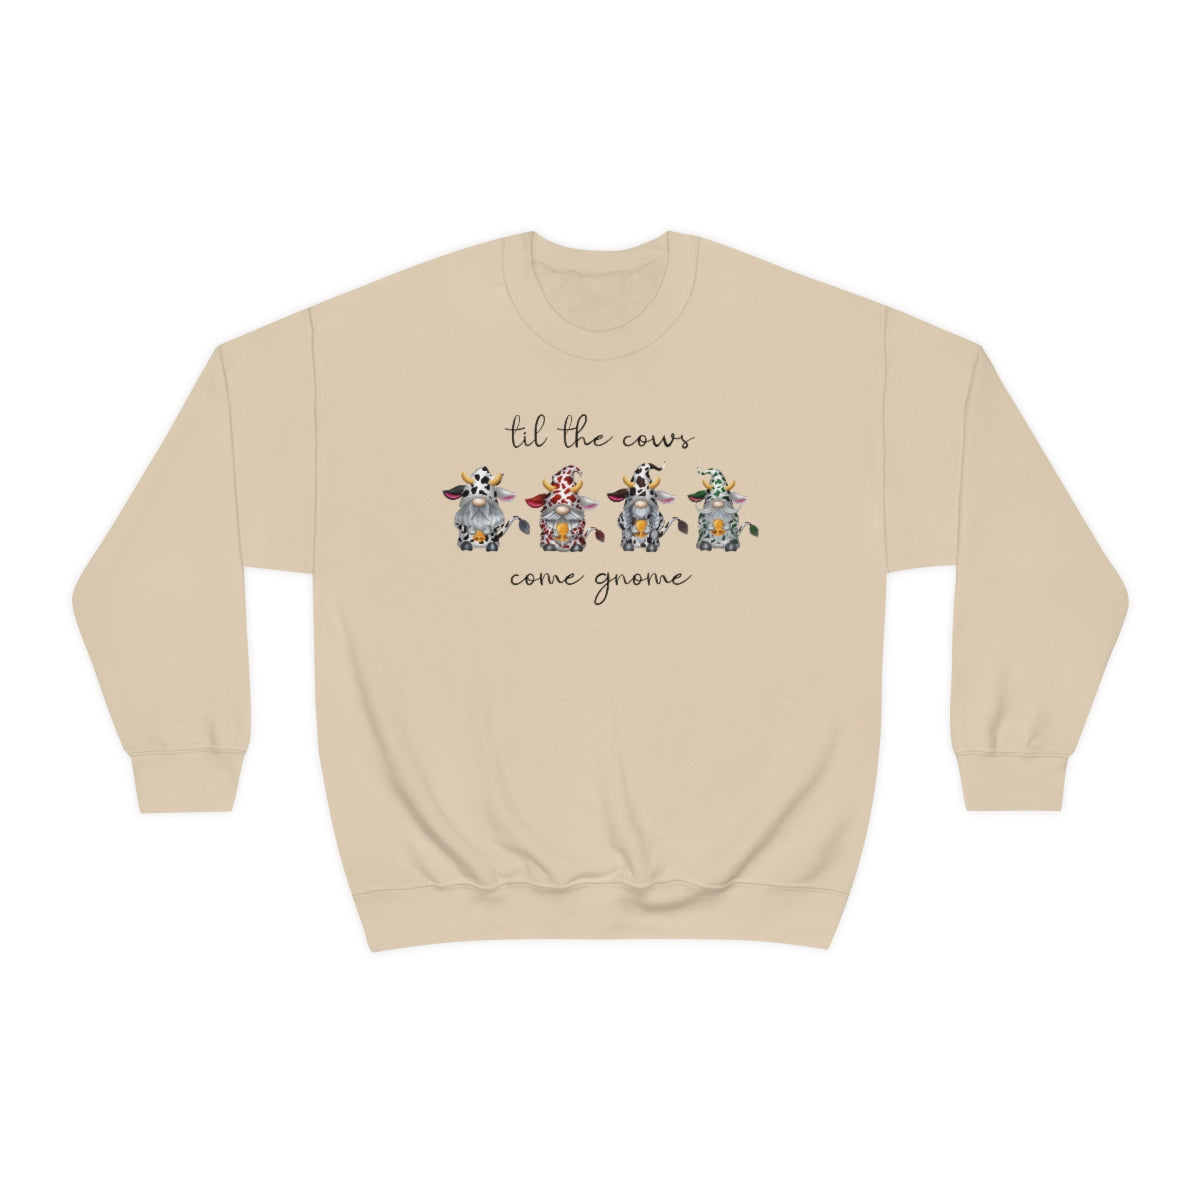 Til The Cows Come Gnome Sweatshirt for Women and Teens, Funny Gnome Gifts featuring Gnomes in Cowprint Sweaters